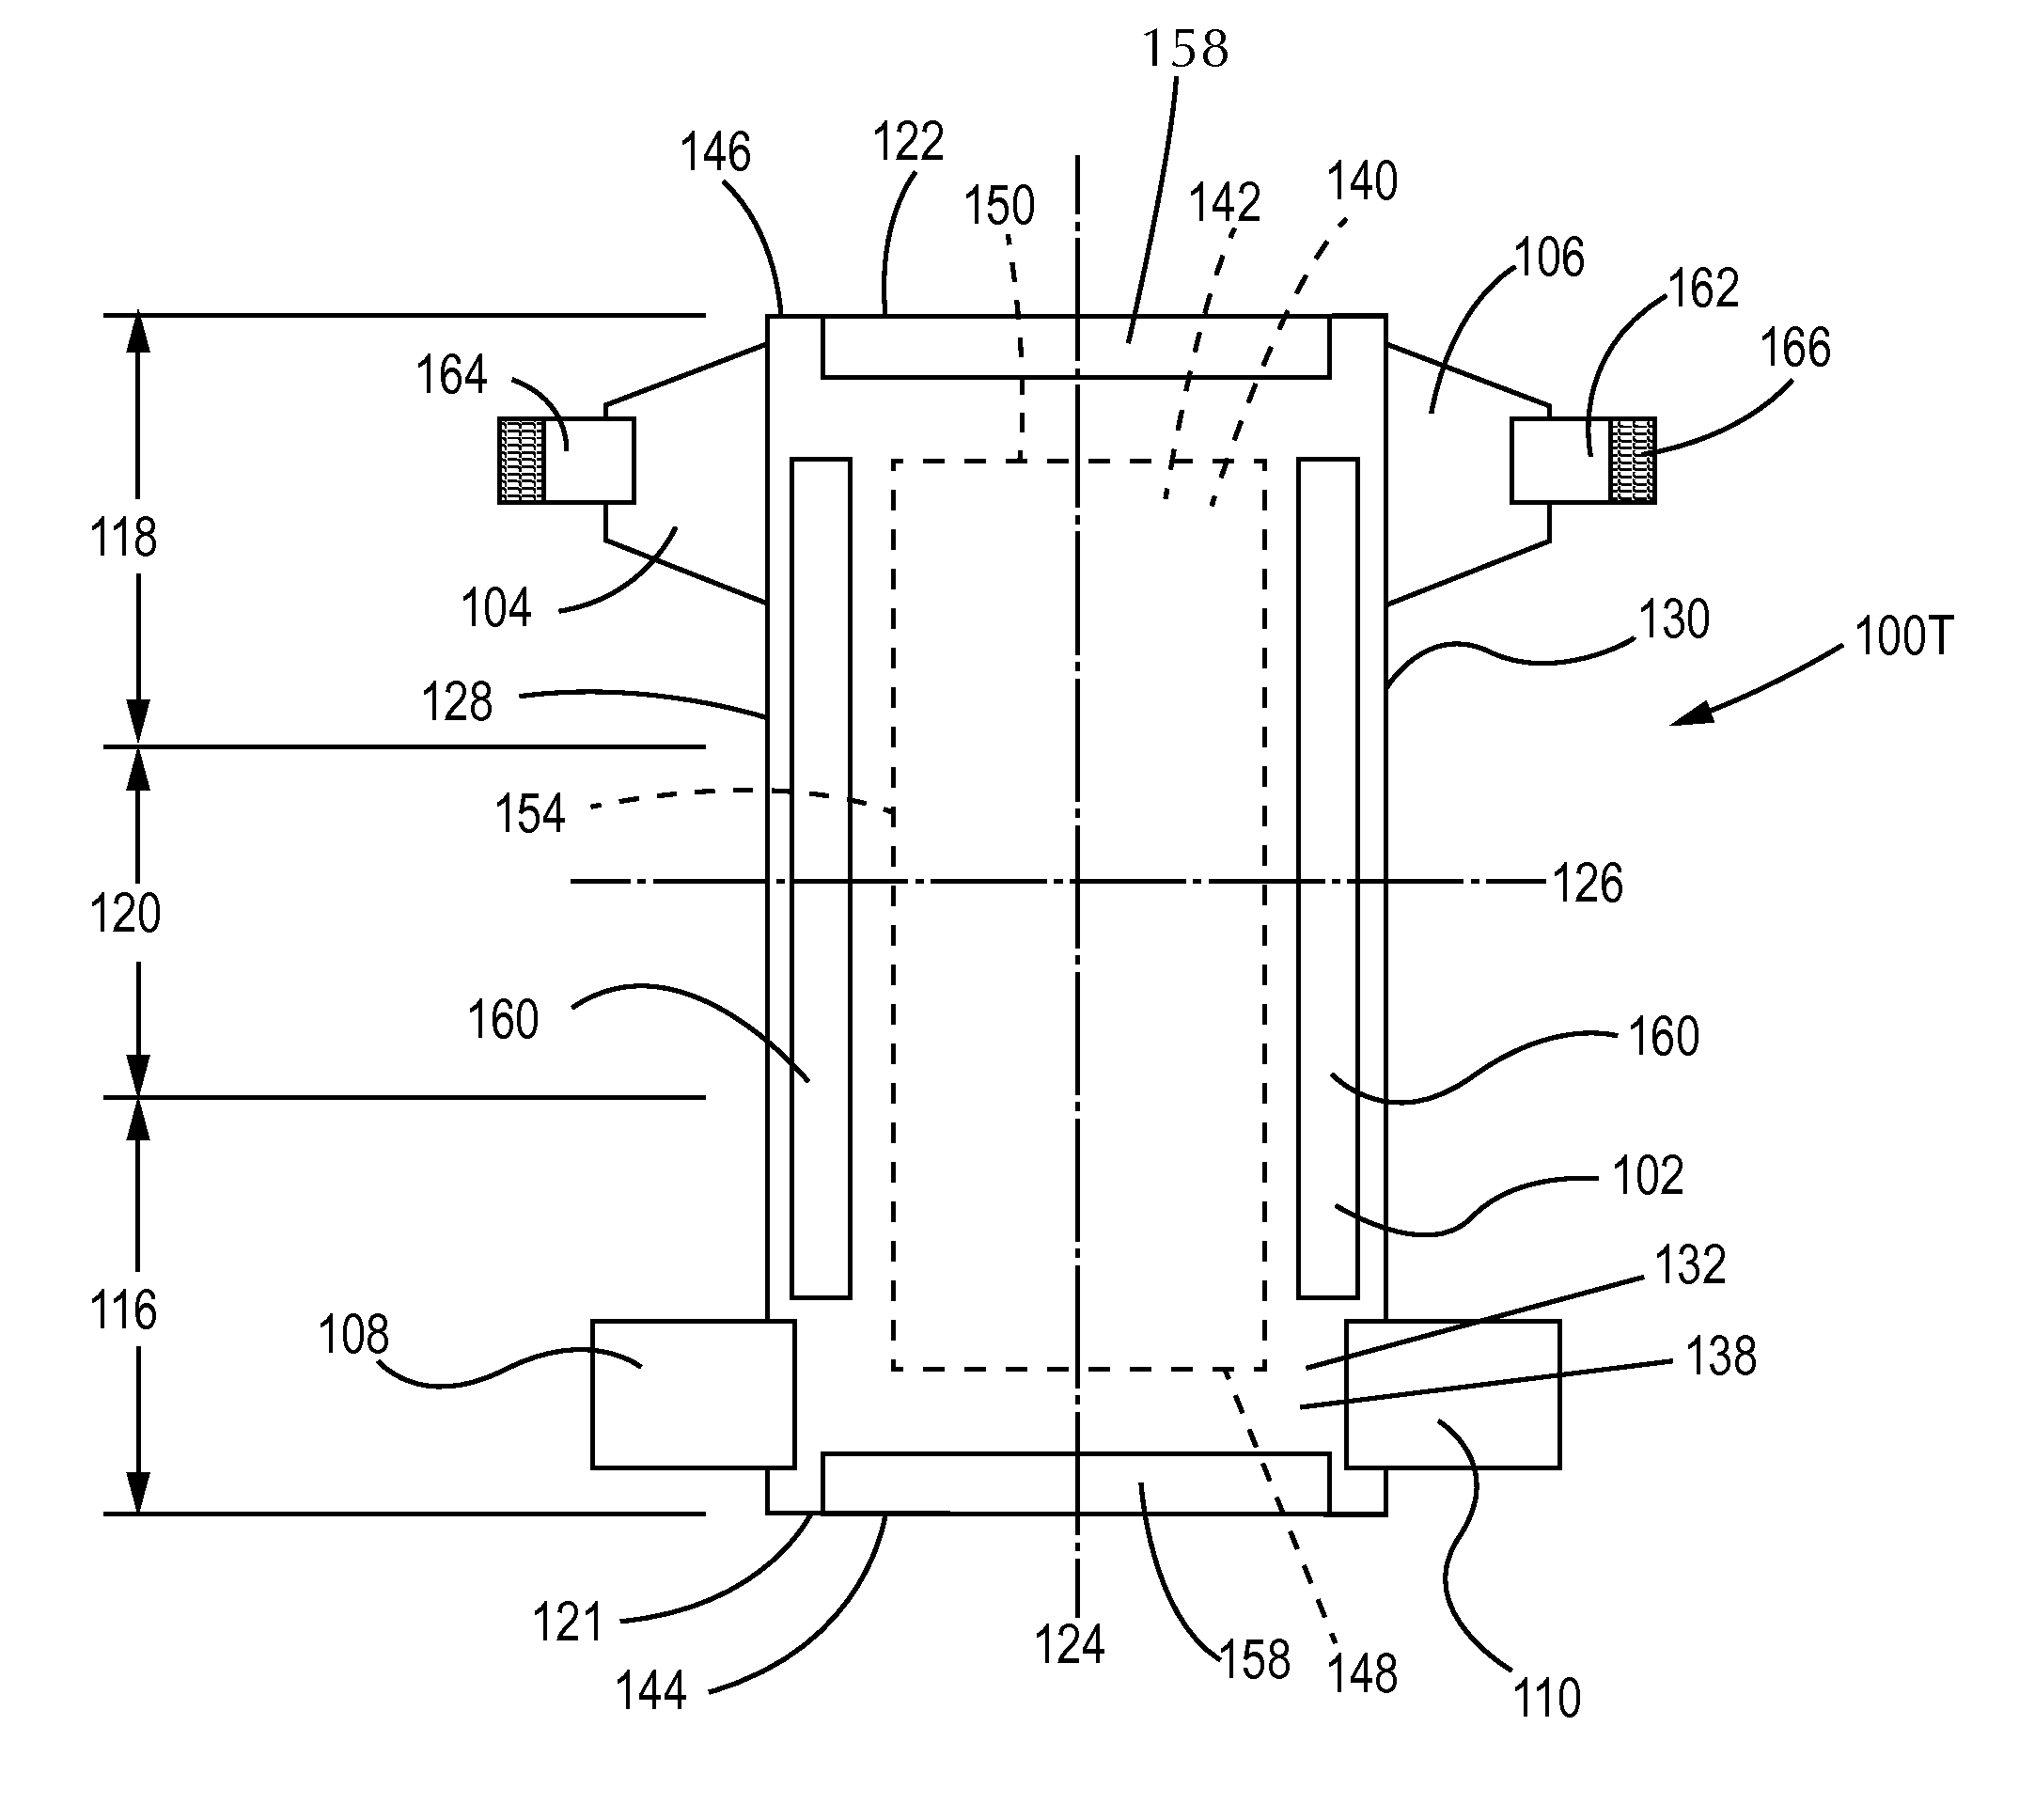 Converting lines and methods for fabricating both taped and pant diapers comprising substantially identical chassis